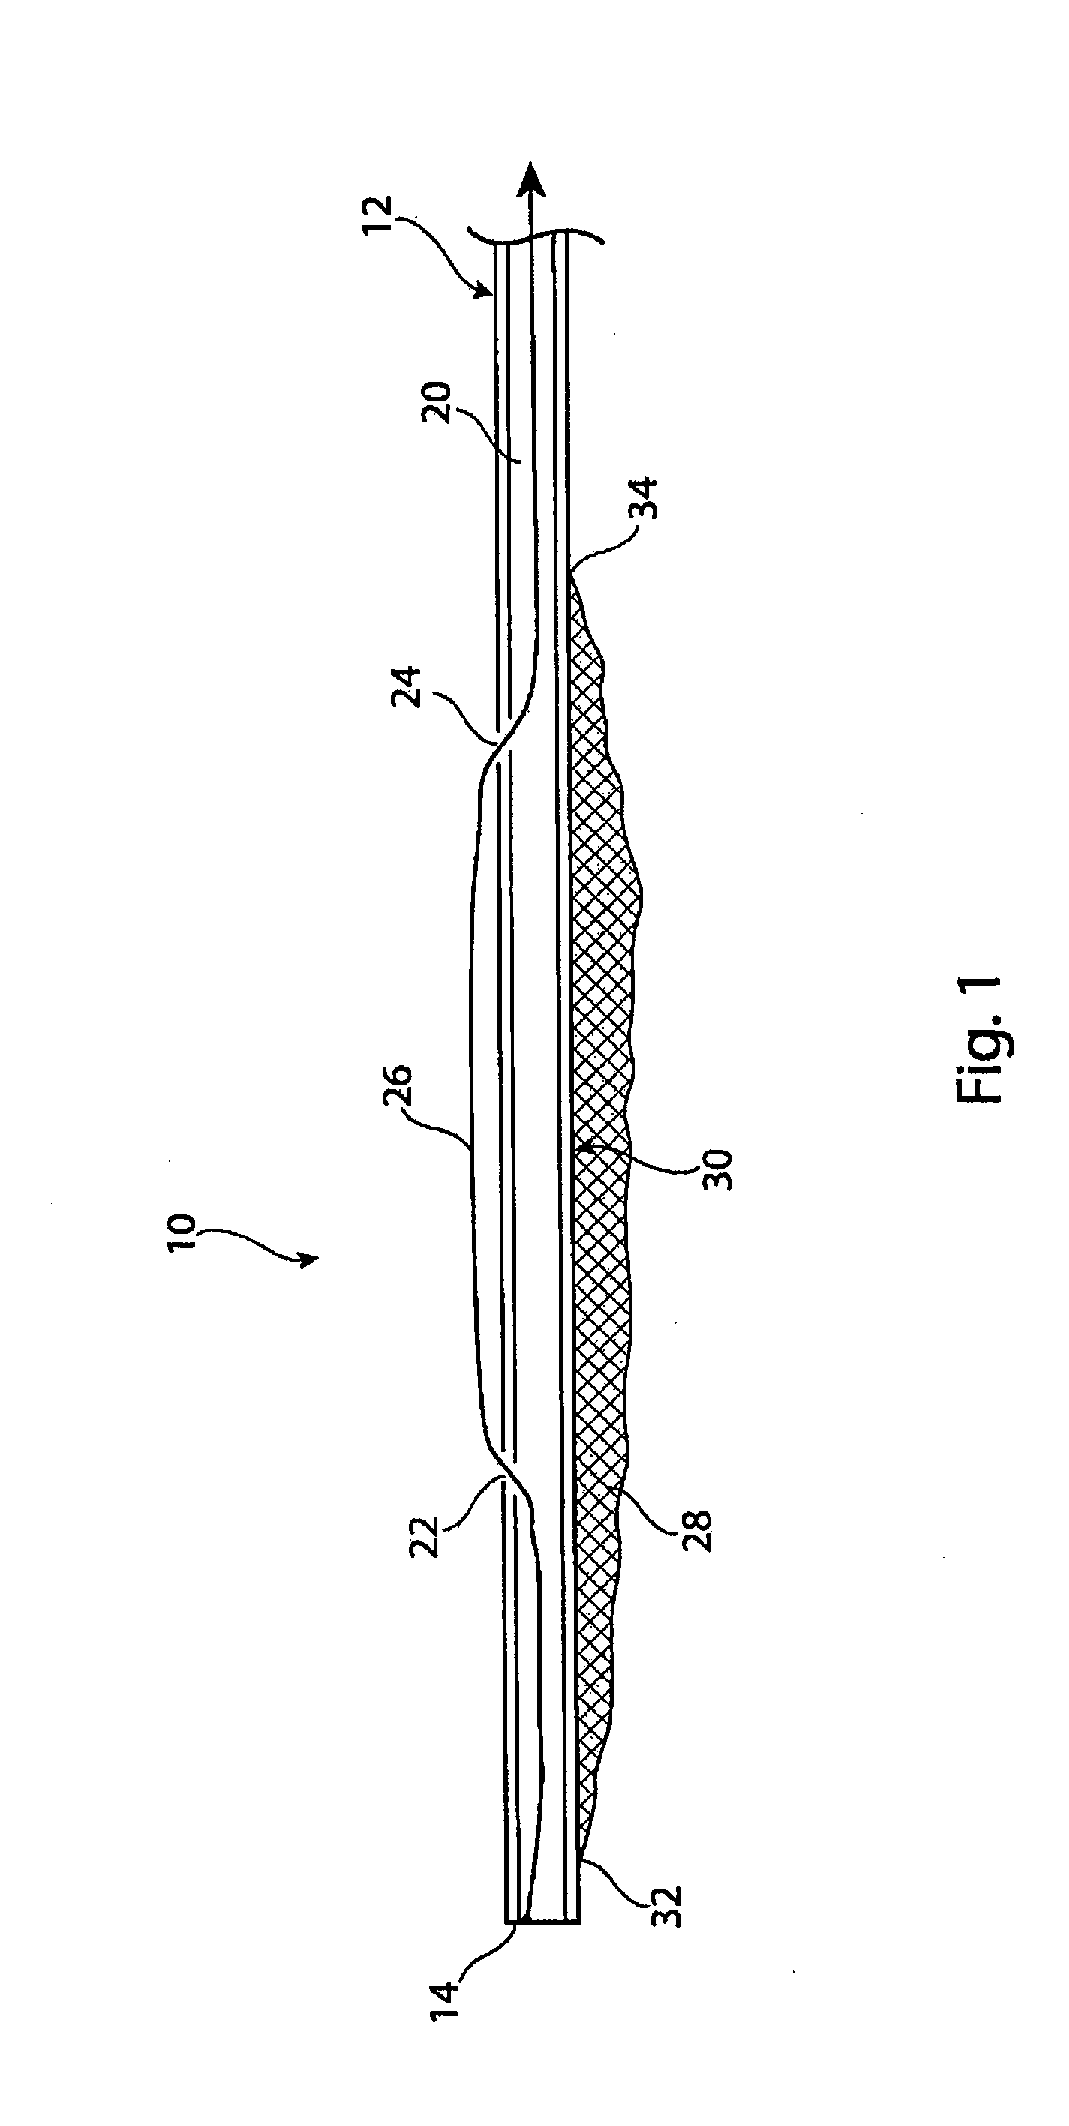 Obstruction capture and removal device